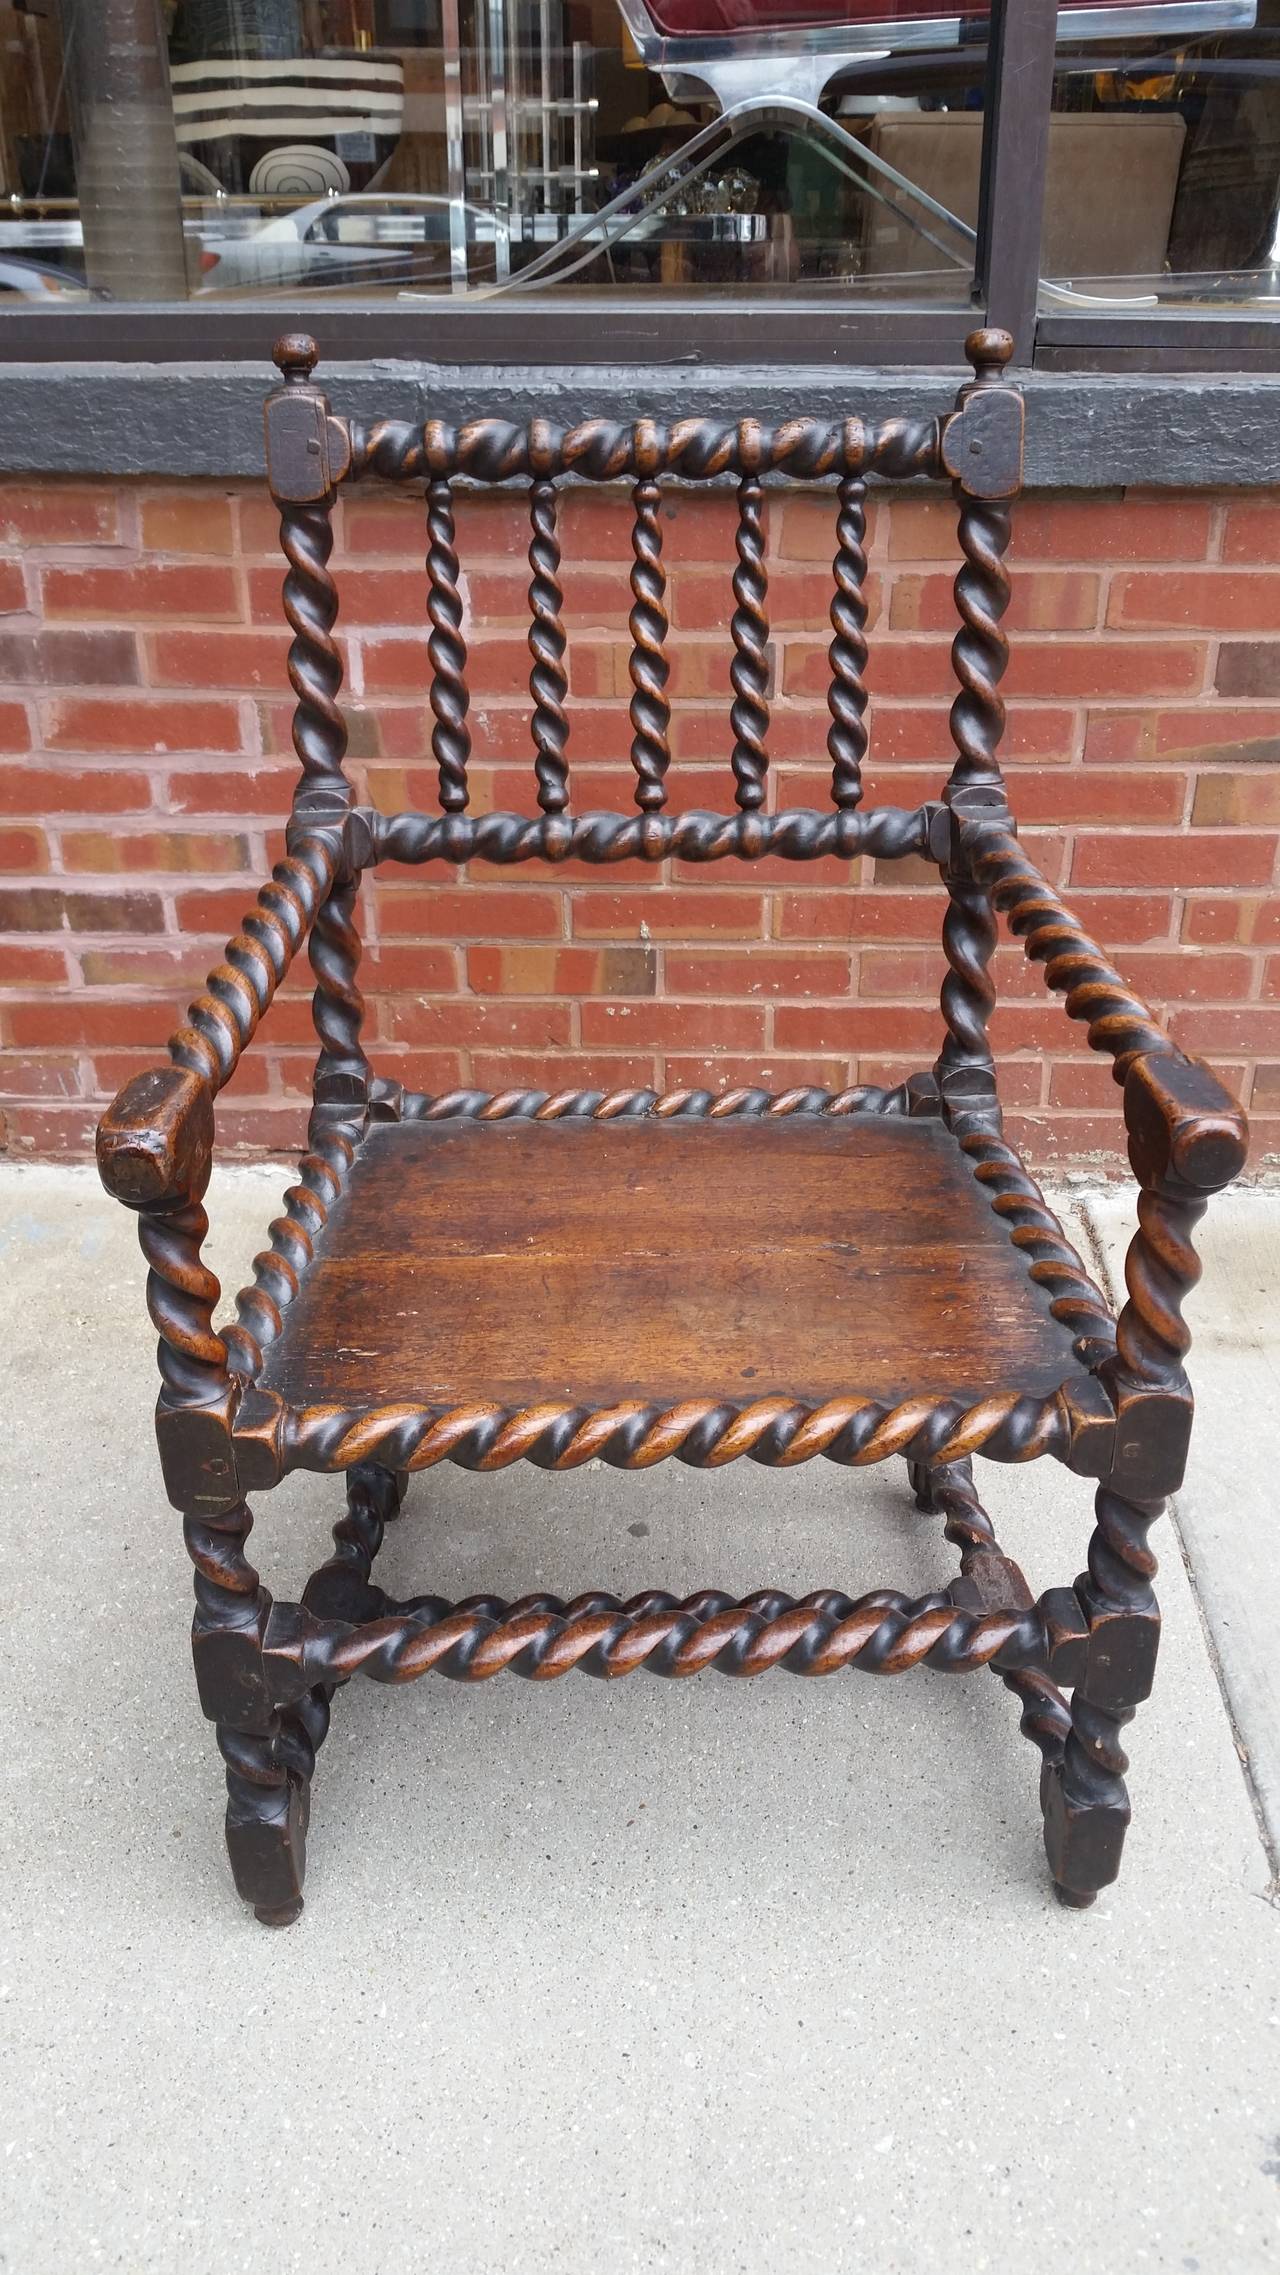 A sturdy oak early Jacobean chair. The chairs back, arms and stretchers are
all hand-turned barley twists. Overall the chair has a wonderful warm patina.